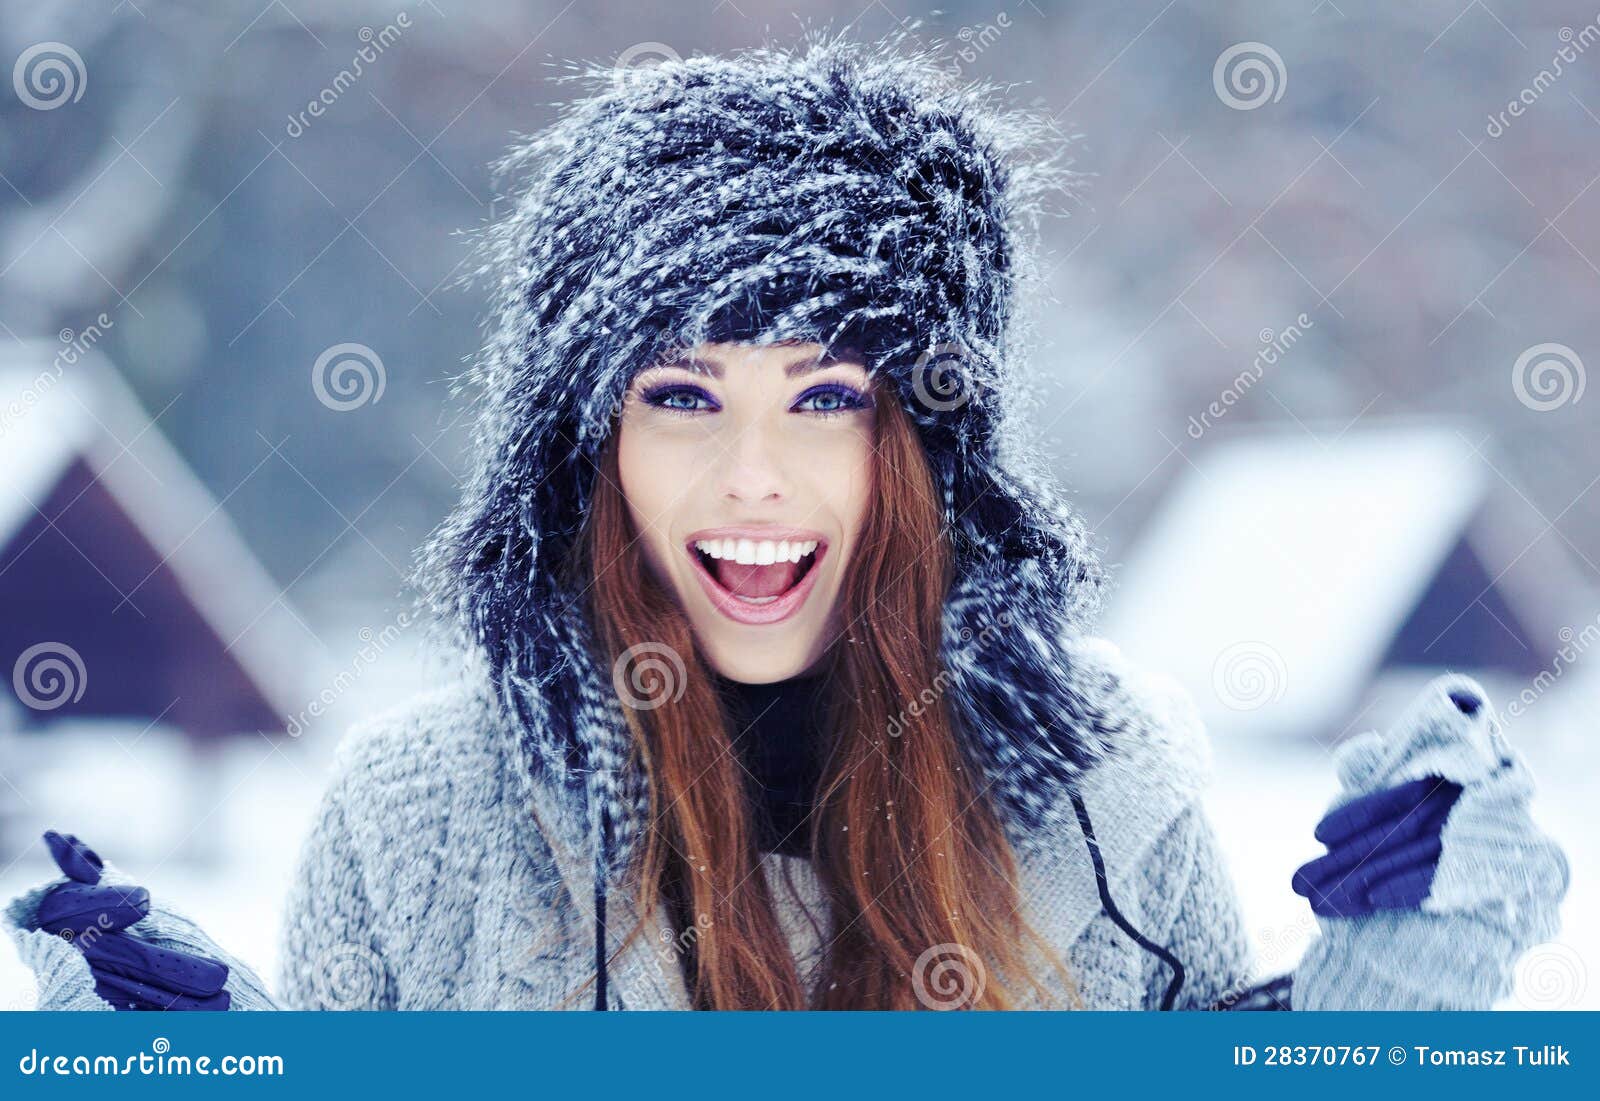 Girl on the Winter Background Stock Image - Image of people, caucasian ...